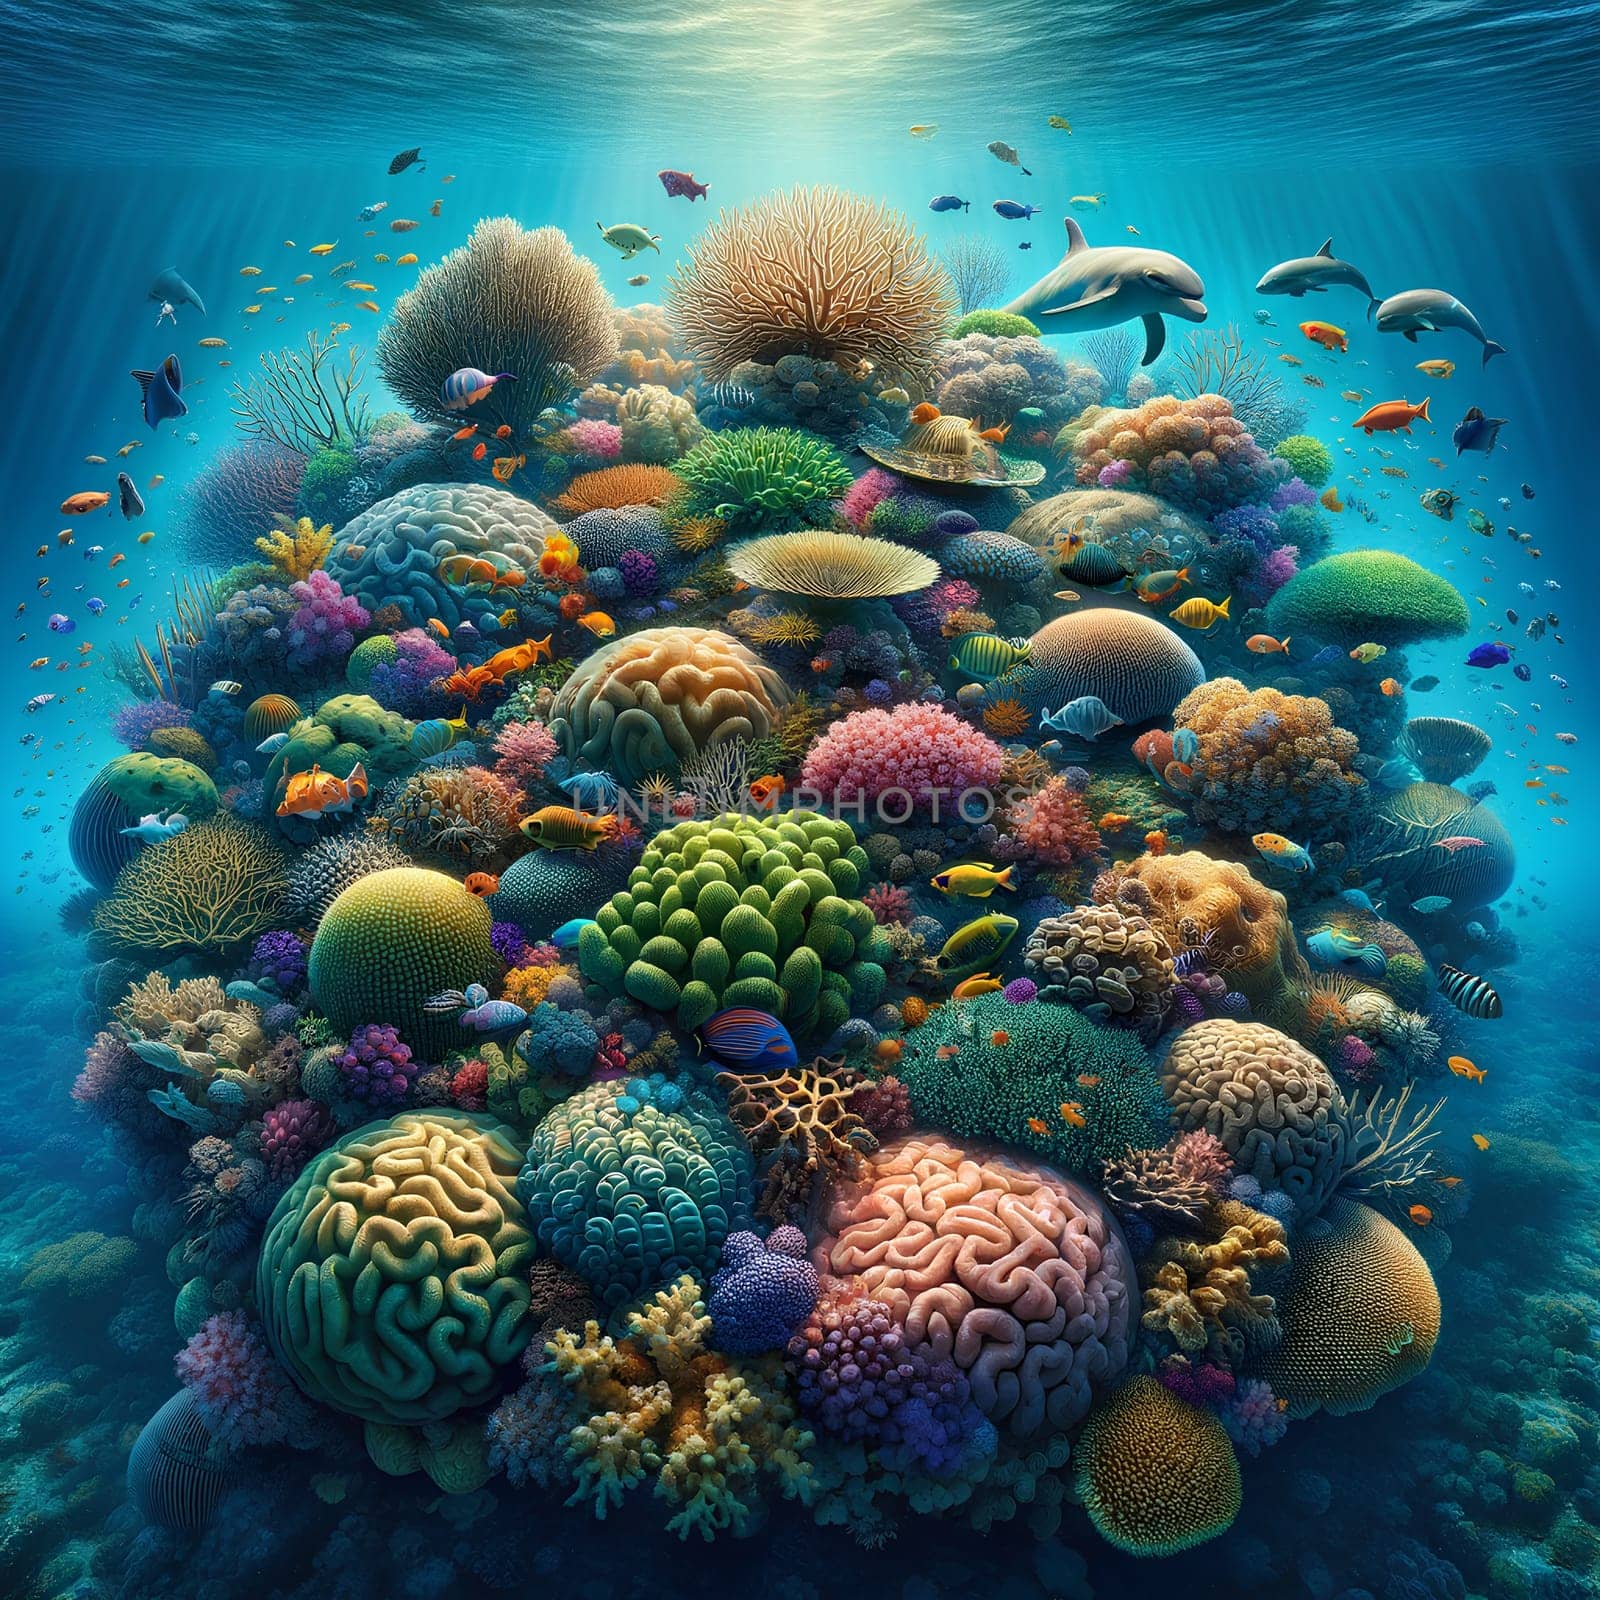 Vibrant coral reef teeming with diverse marine life, bathed in sunlight. Explore the underwater wonderland through this captivating image by aprilphoto